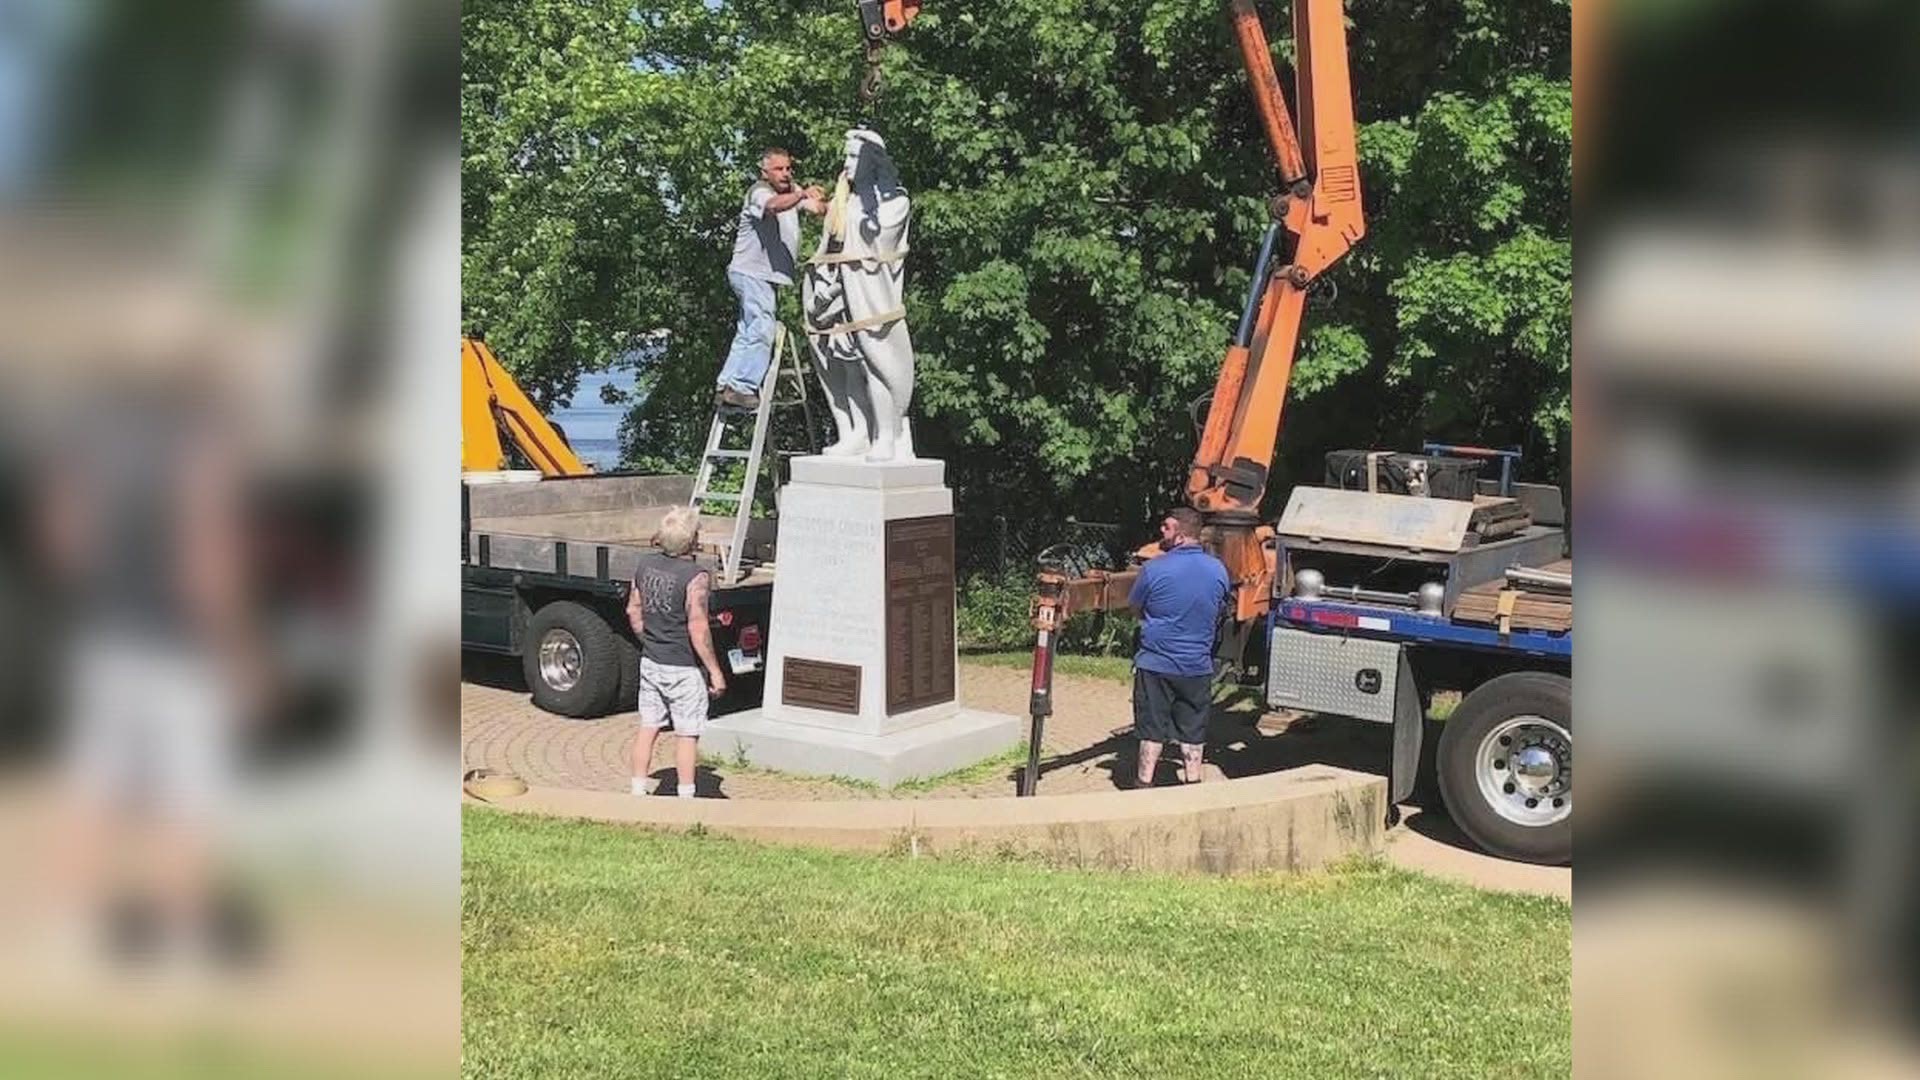 Wooster Square in New Haven, has been home to a Columbus statue since 1892. However, momentum has grown over the past couple of years to remove it.